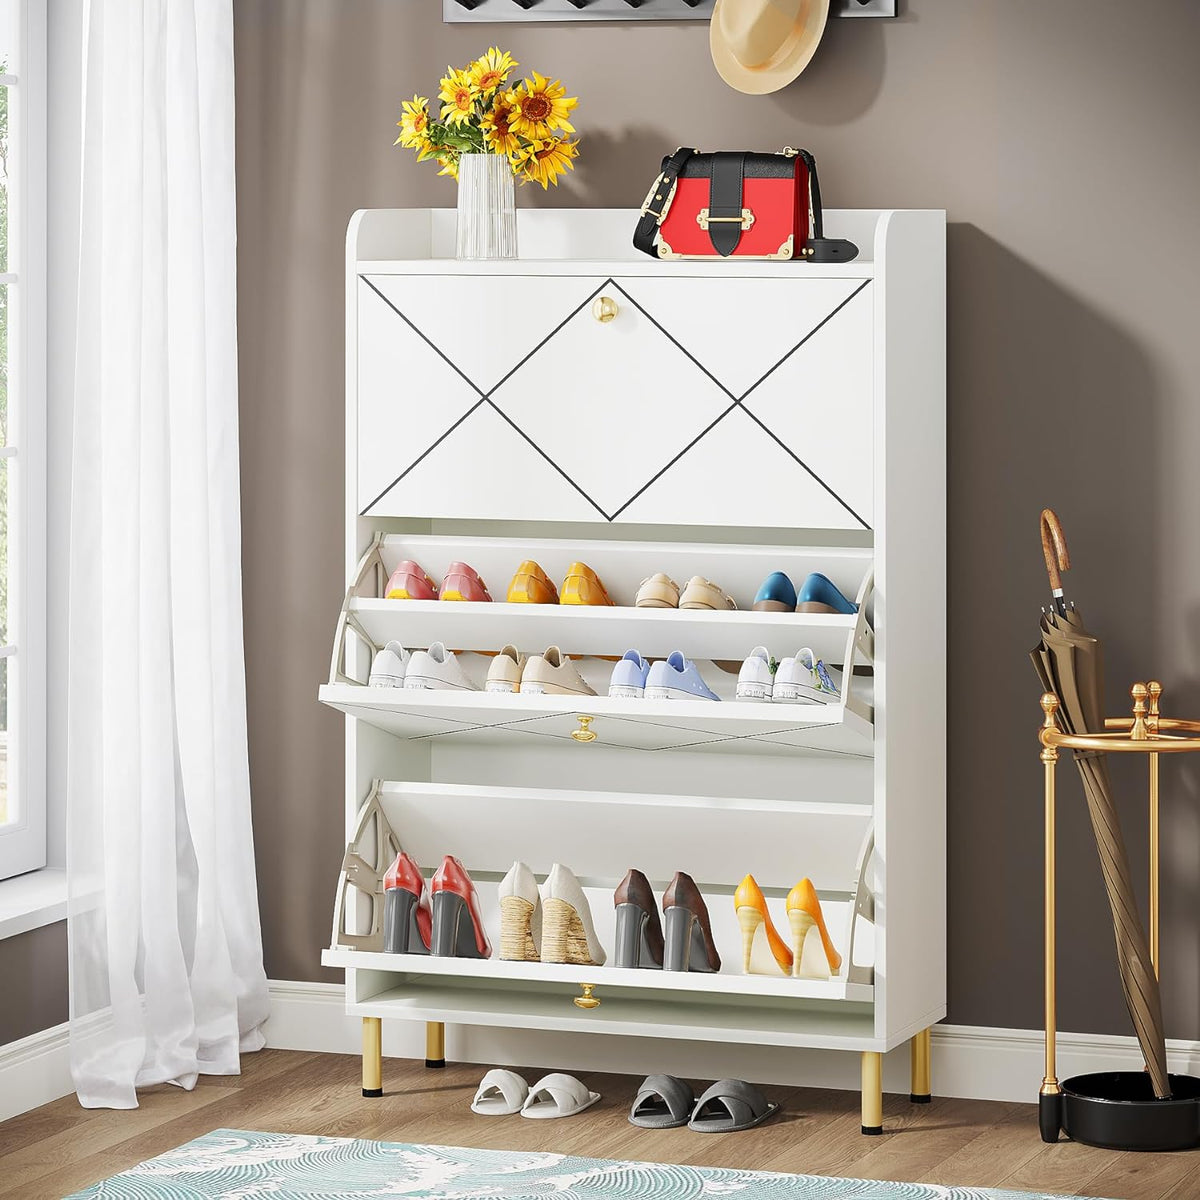  Shoe Rack For Entryway Cabinet, Shoe Organizer Cabinet